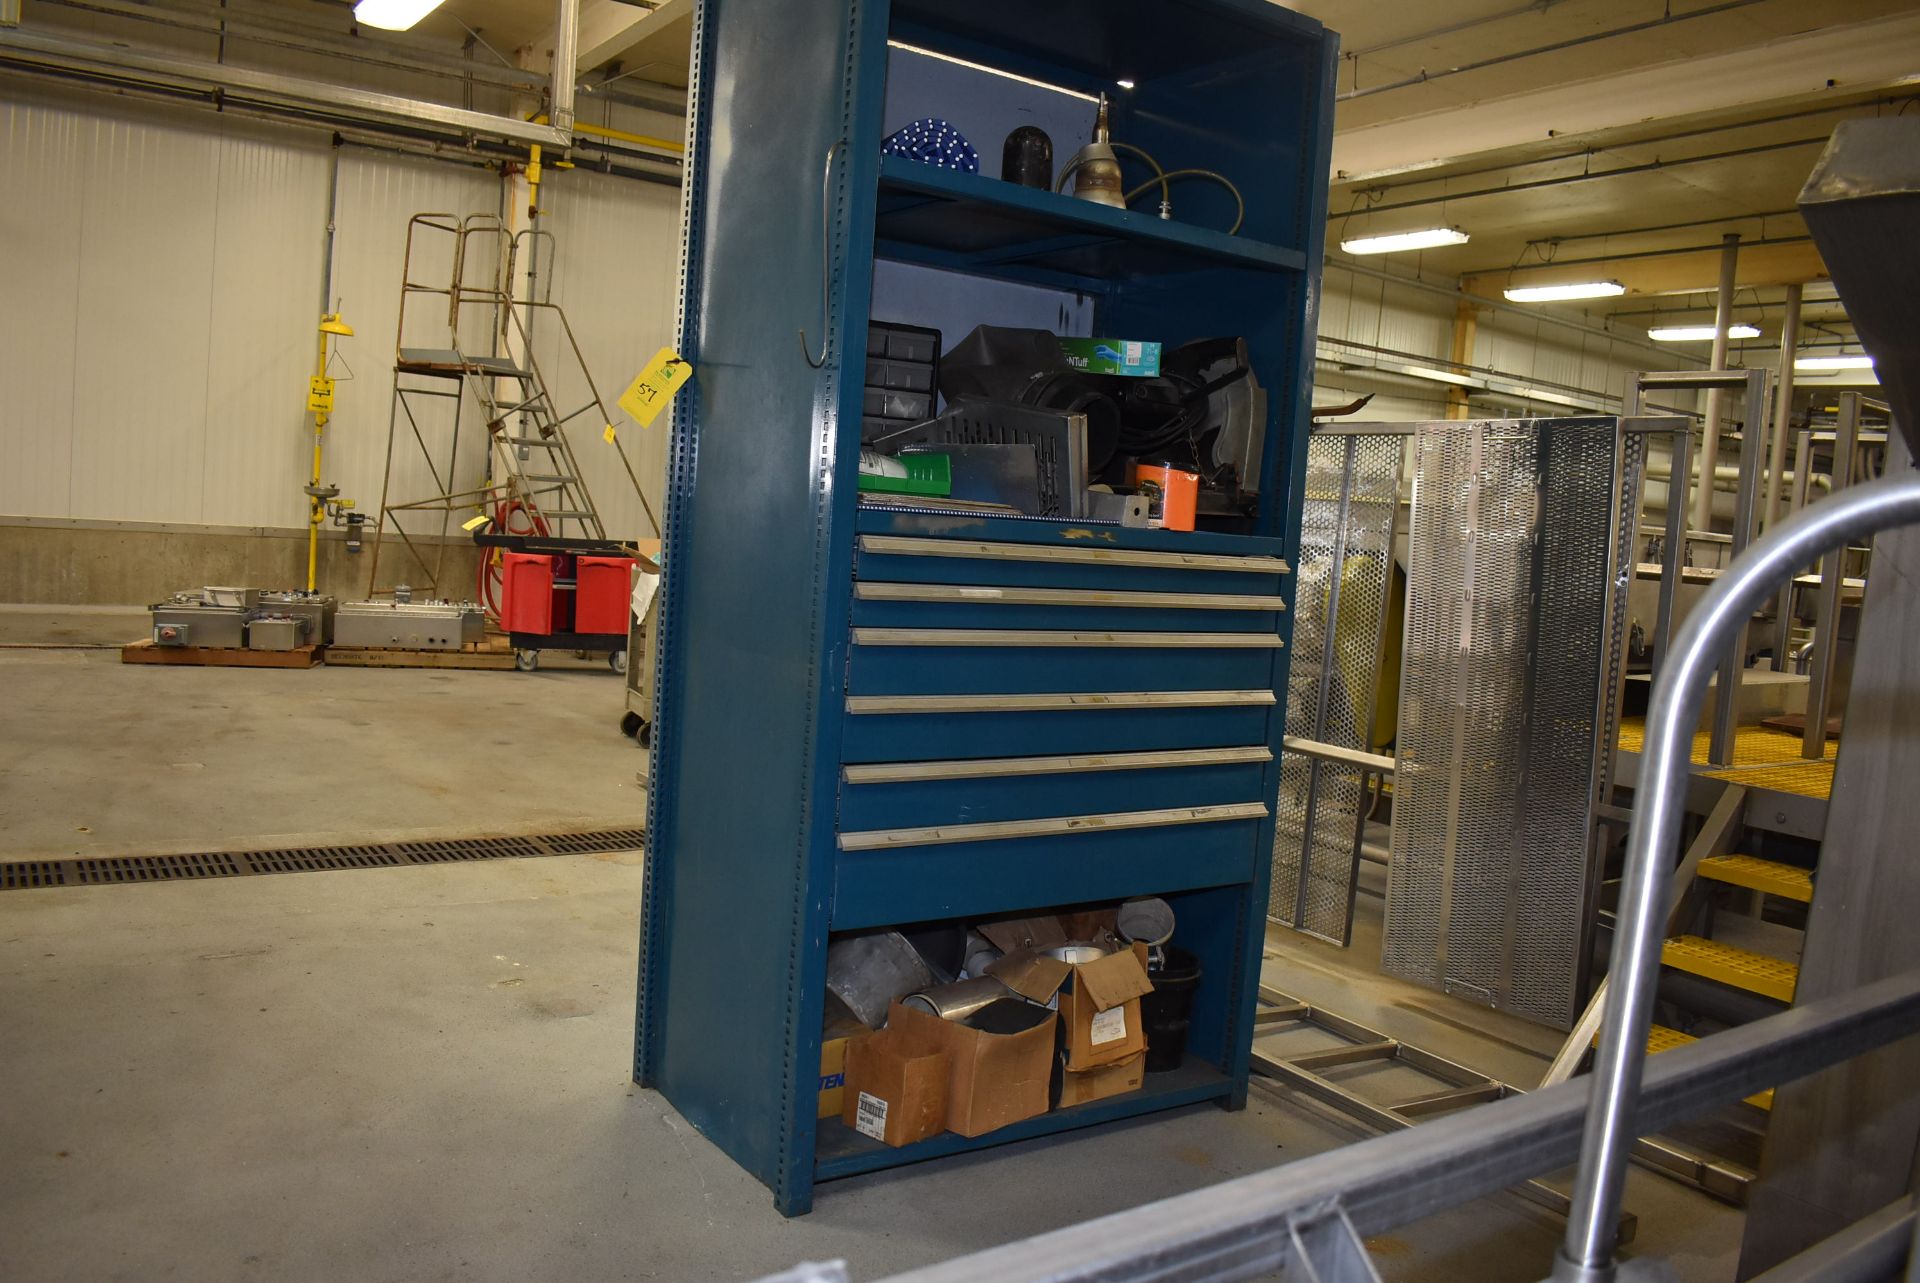 (Located in Mendota, IL) Vidmar type 6-Drawer Tool Cabinet w/Shelf - Blue - Image 2 of 2